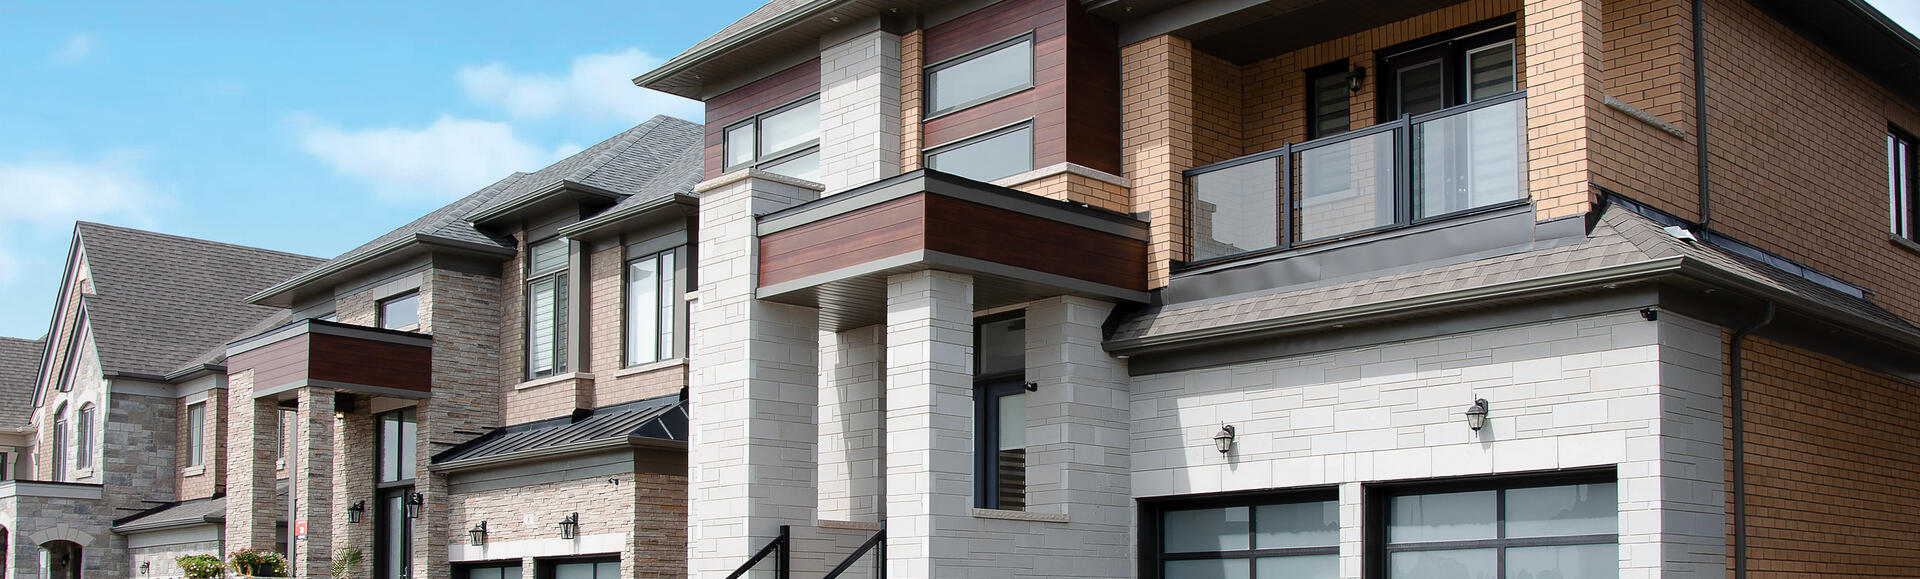 House with driveway using Contemporary, Contempo and Molina® products from Brampton Brick